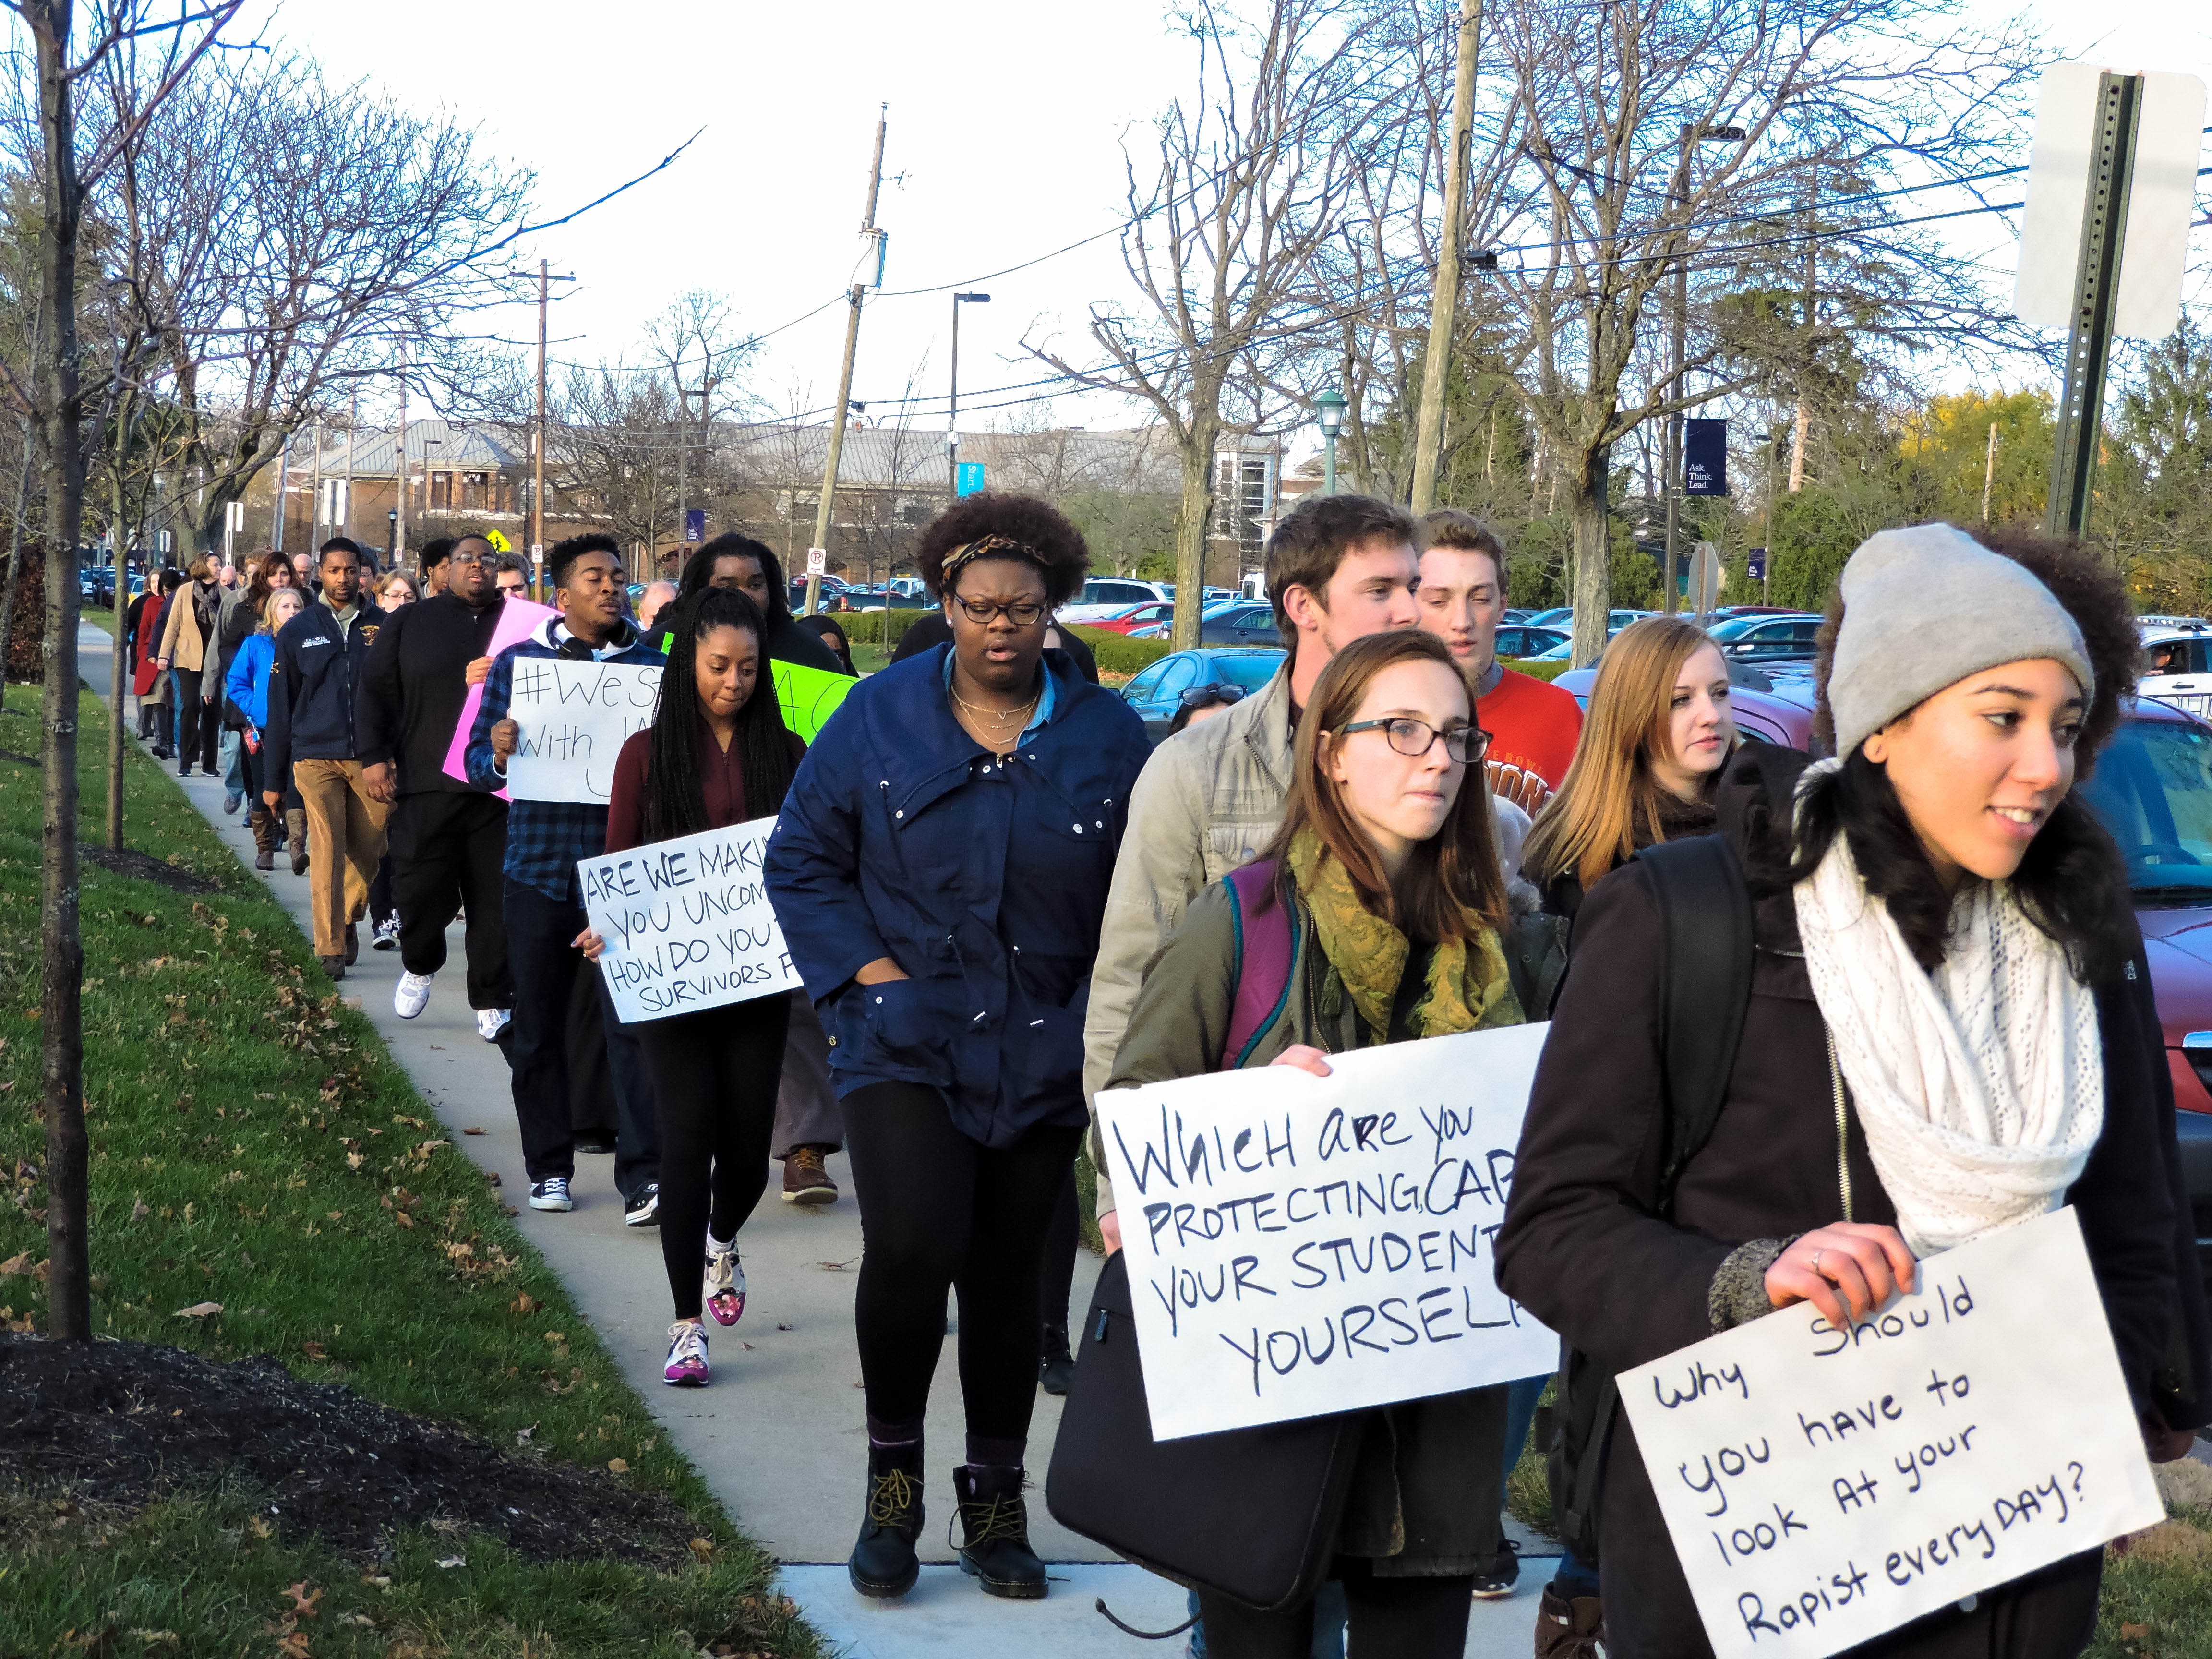 Students march in solidarity, hold discussion of racial discrimination on campus